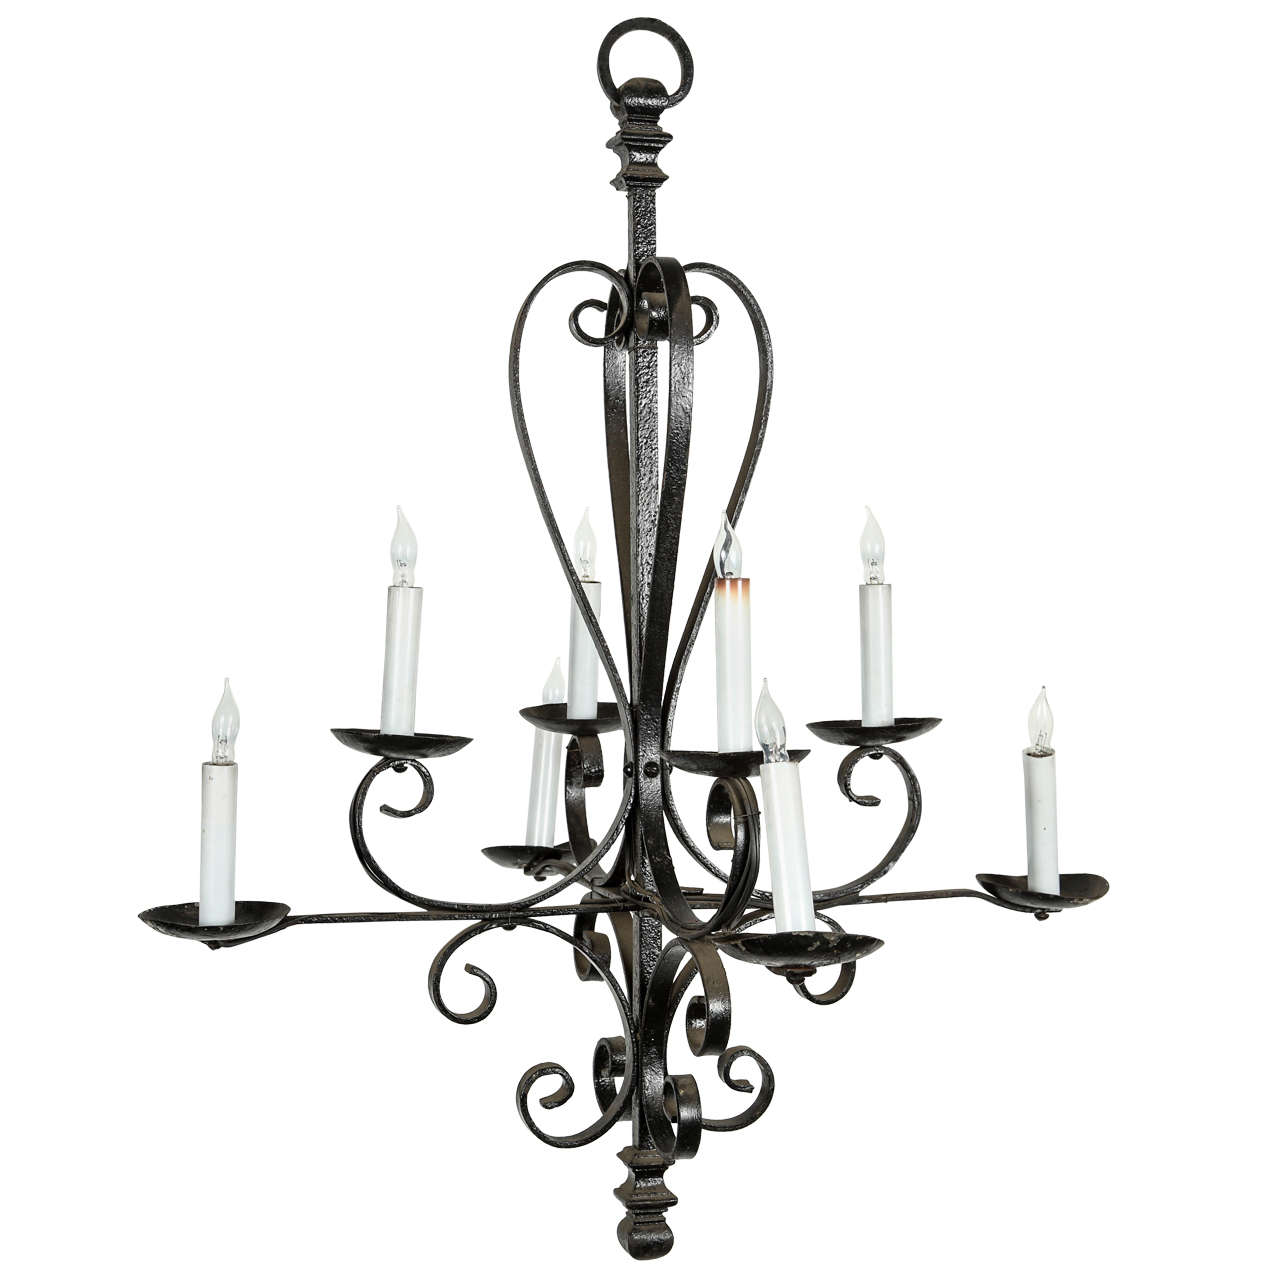 Eight-Candle Wrought Iron Chandelier